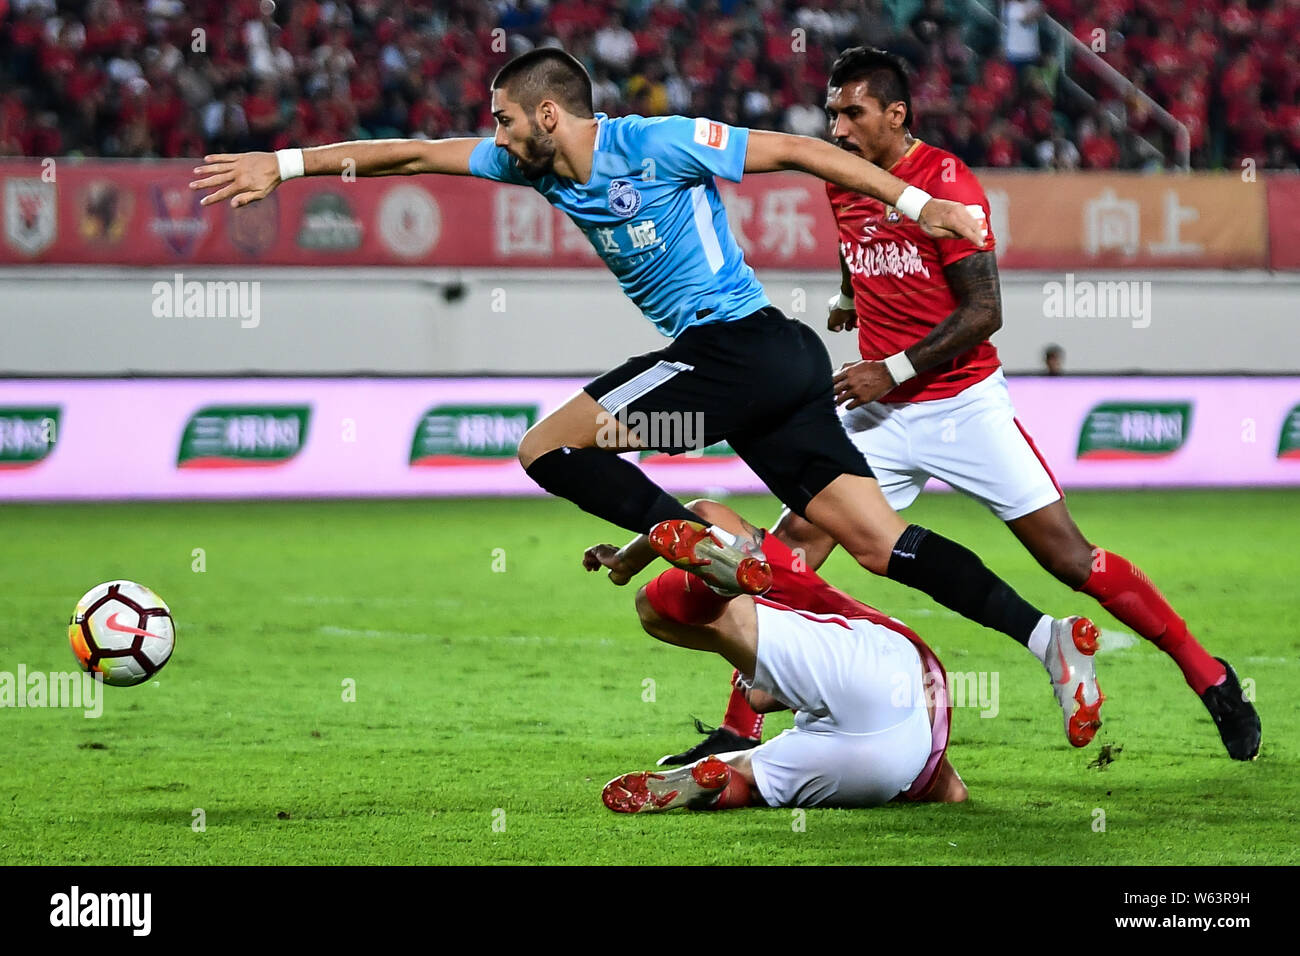 Belgian professional football player Yannick Ferreira Carrasco, front, of Dalian Yifang dribbles against Guangzhou Evergrande Taobao in their 24th rou Stock Photo